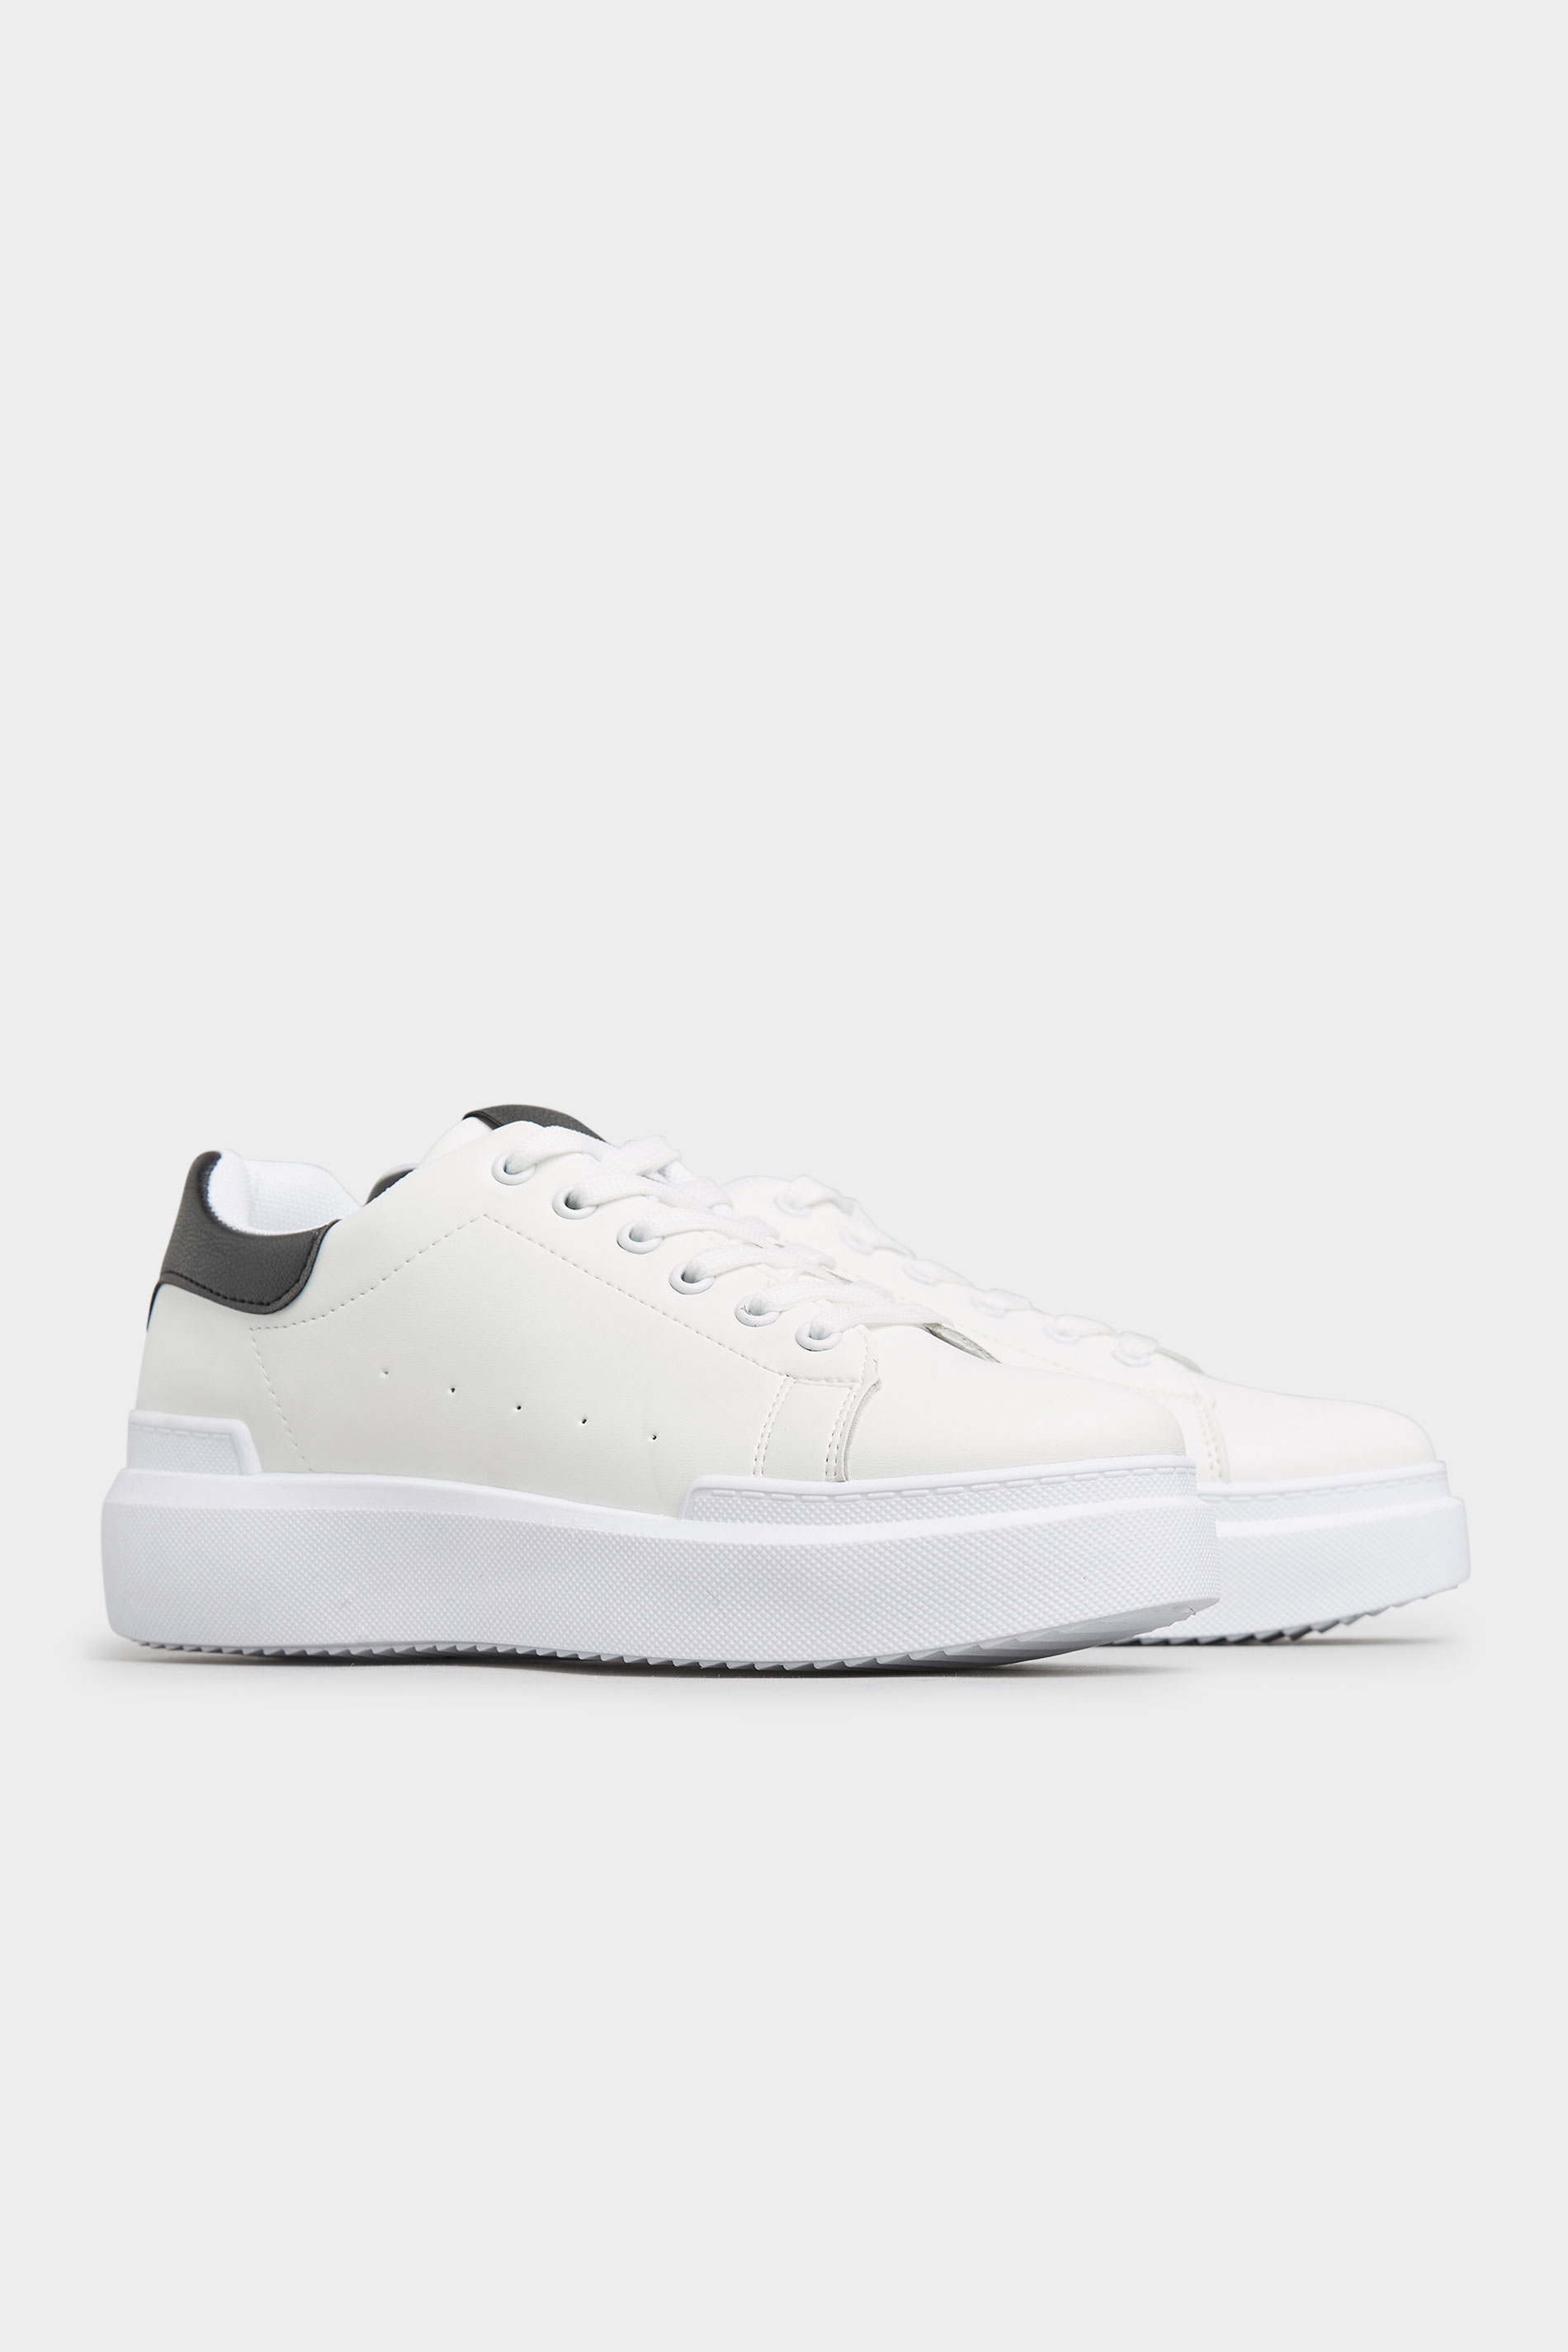 LIMITED COLLECTION White and Black Flatform Trainer In Wide Fit_B.jpg